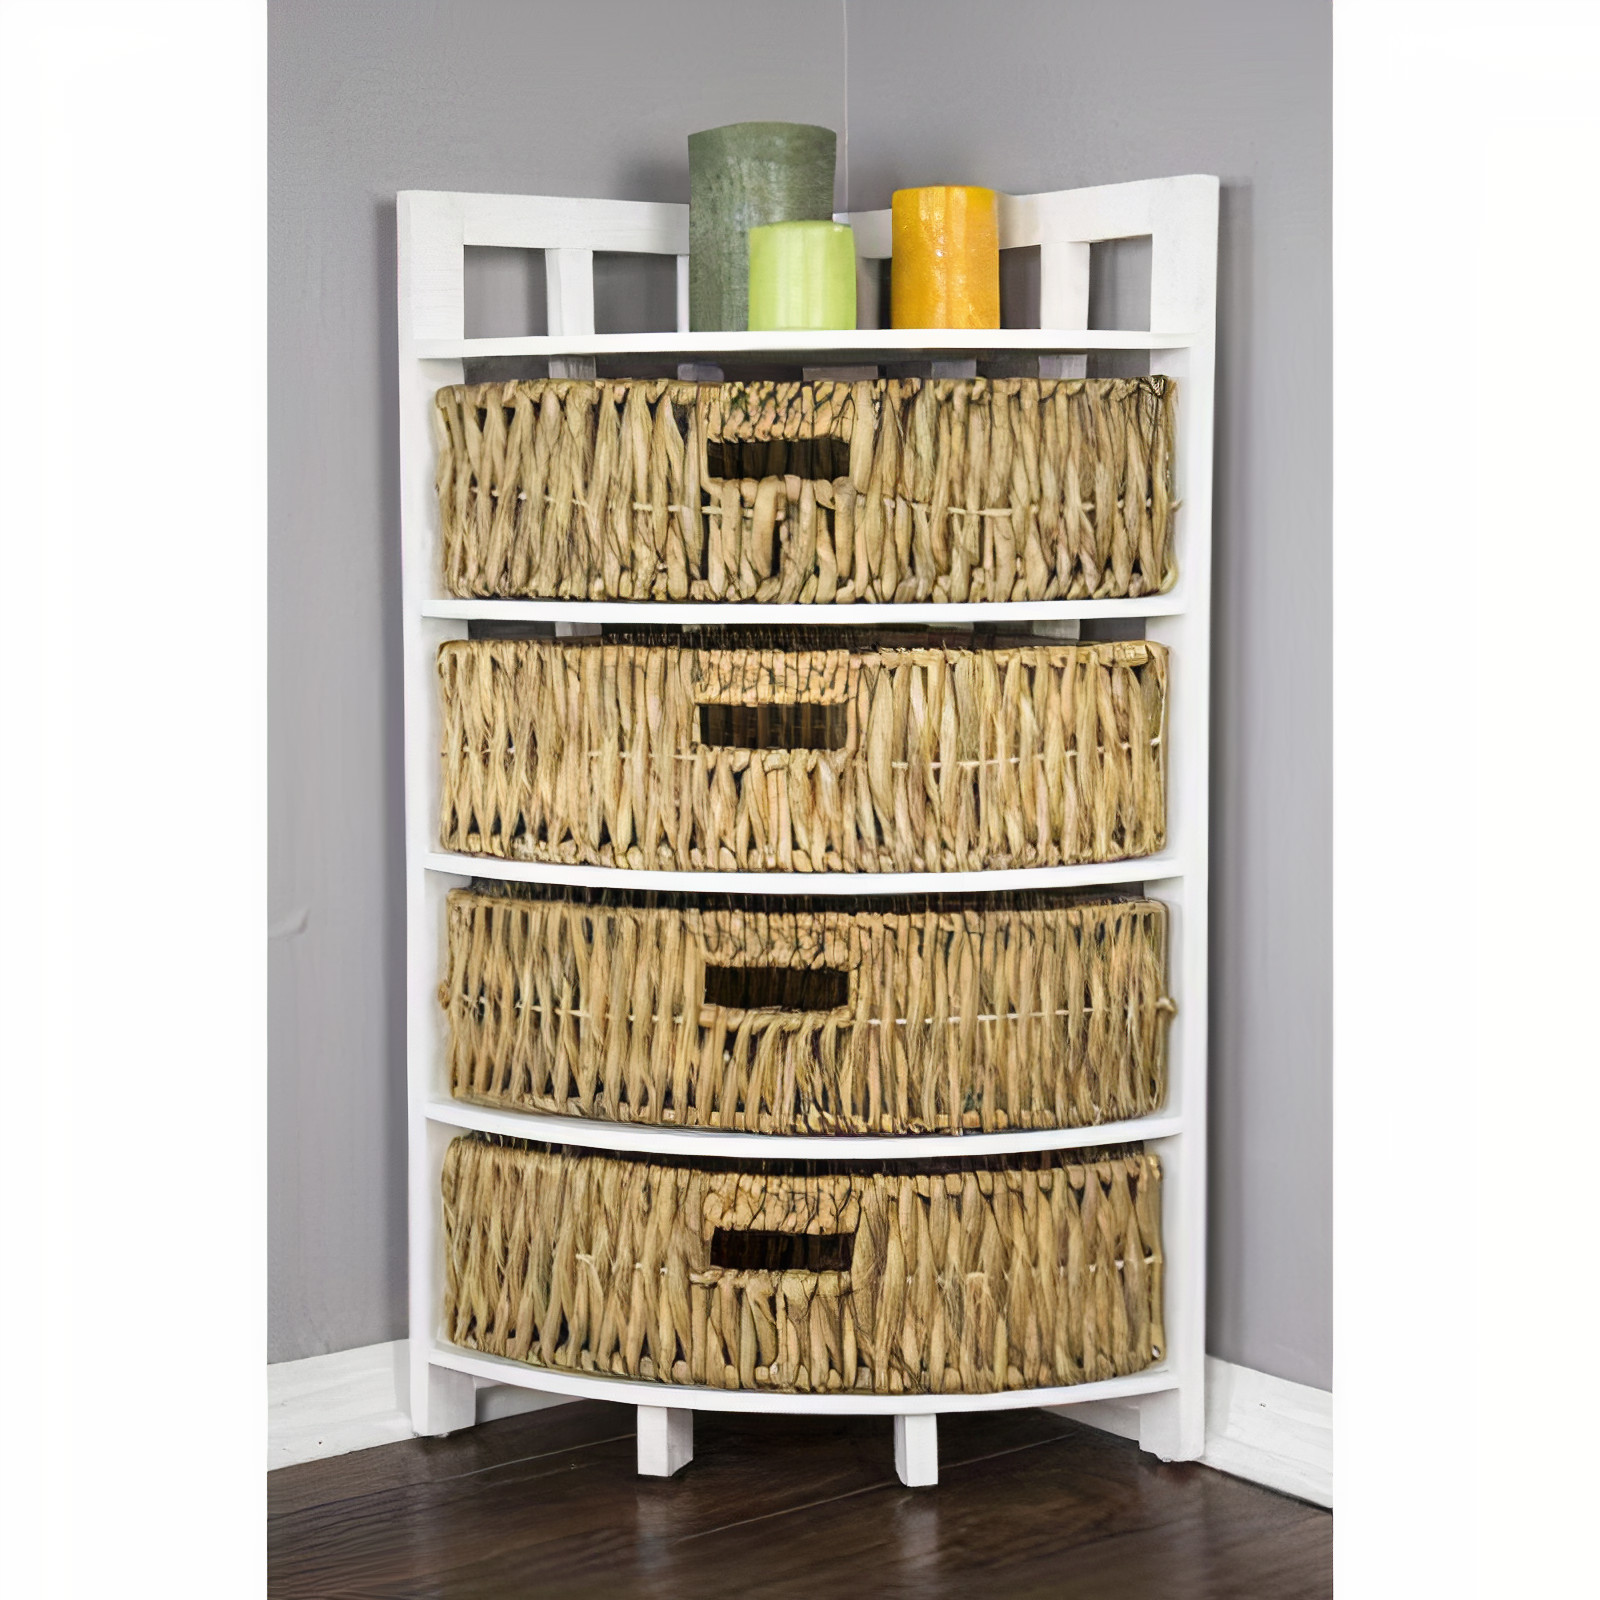 15.5" X 15.5" X 34.25" White Wash with Natural Water Hyacinth Wood MDF Water Hyacinth Corner Storage with Hyacinth Baskets